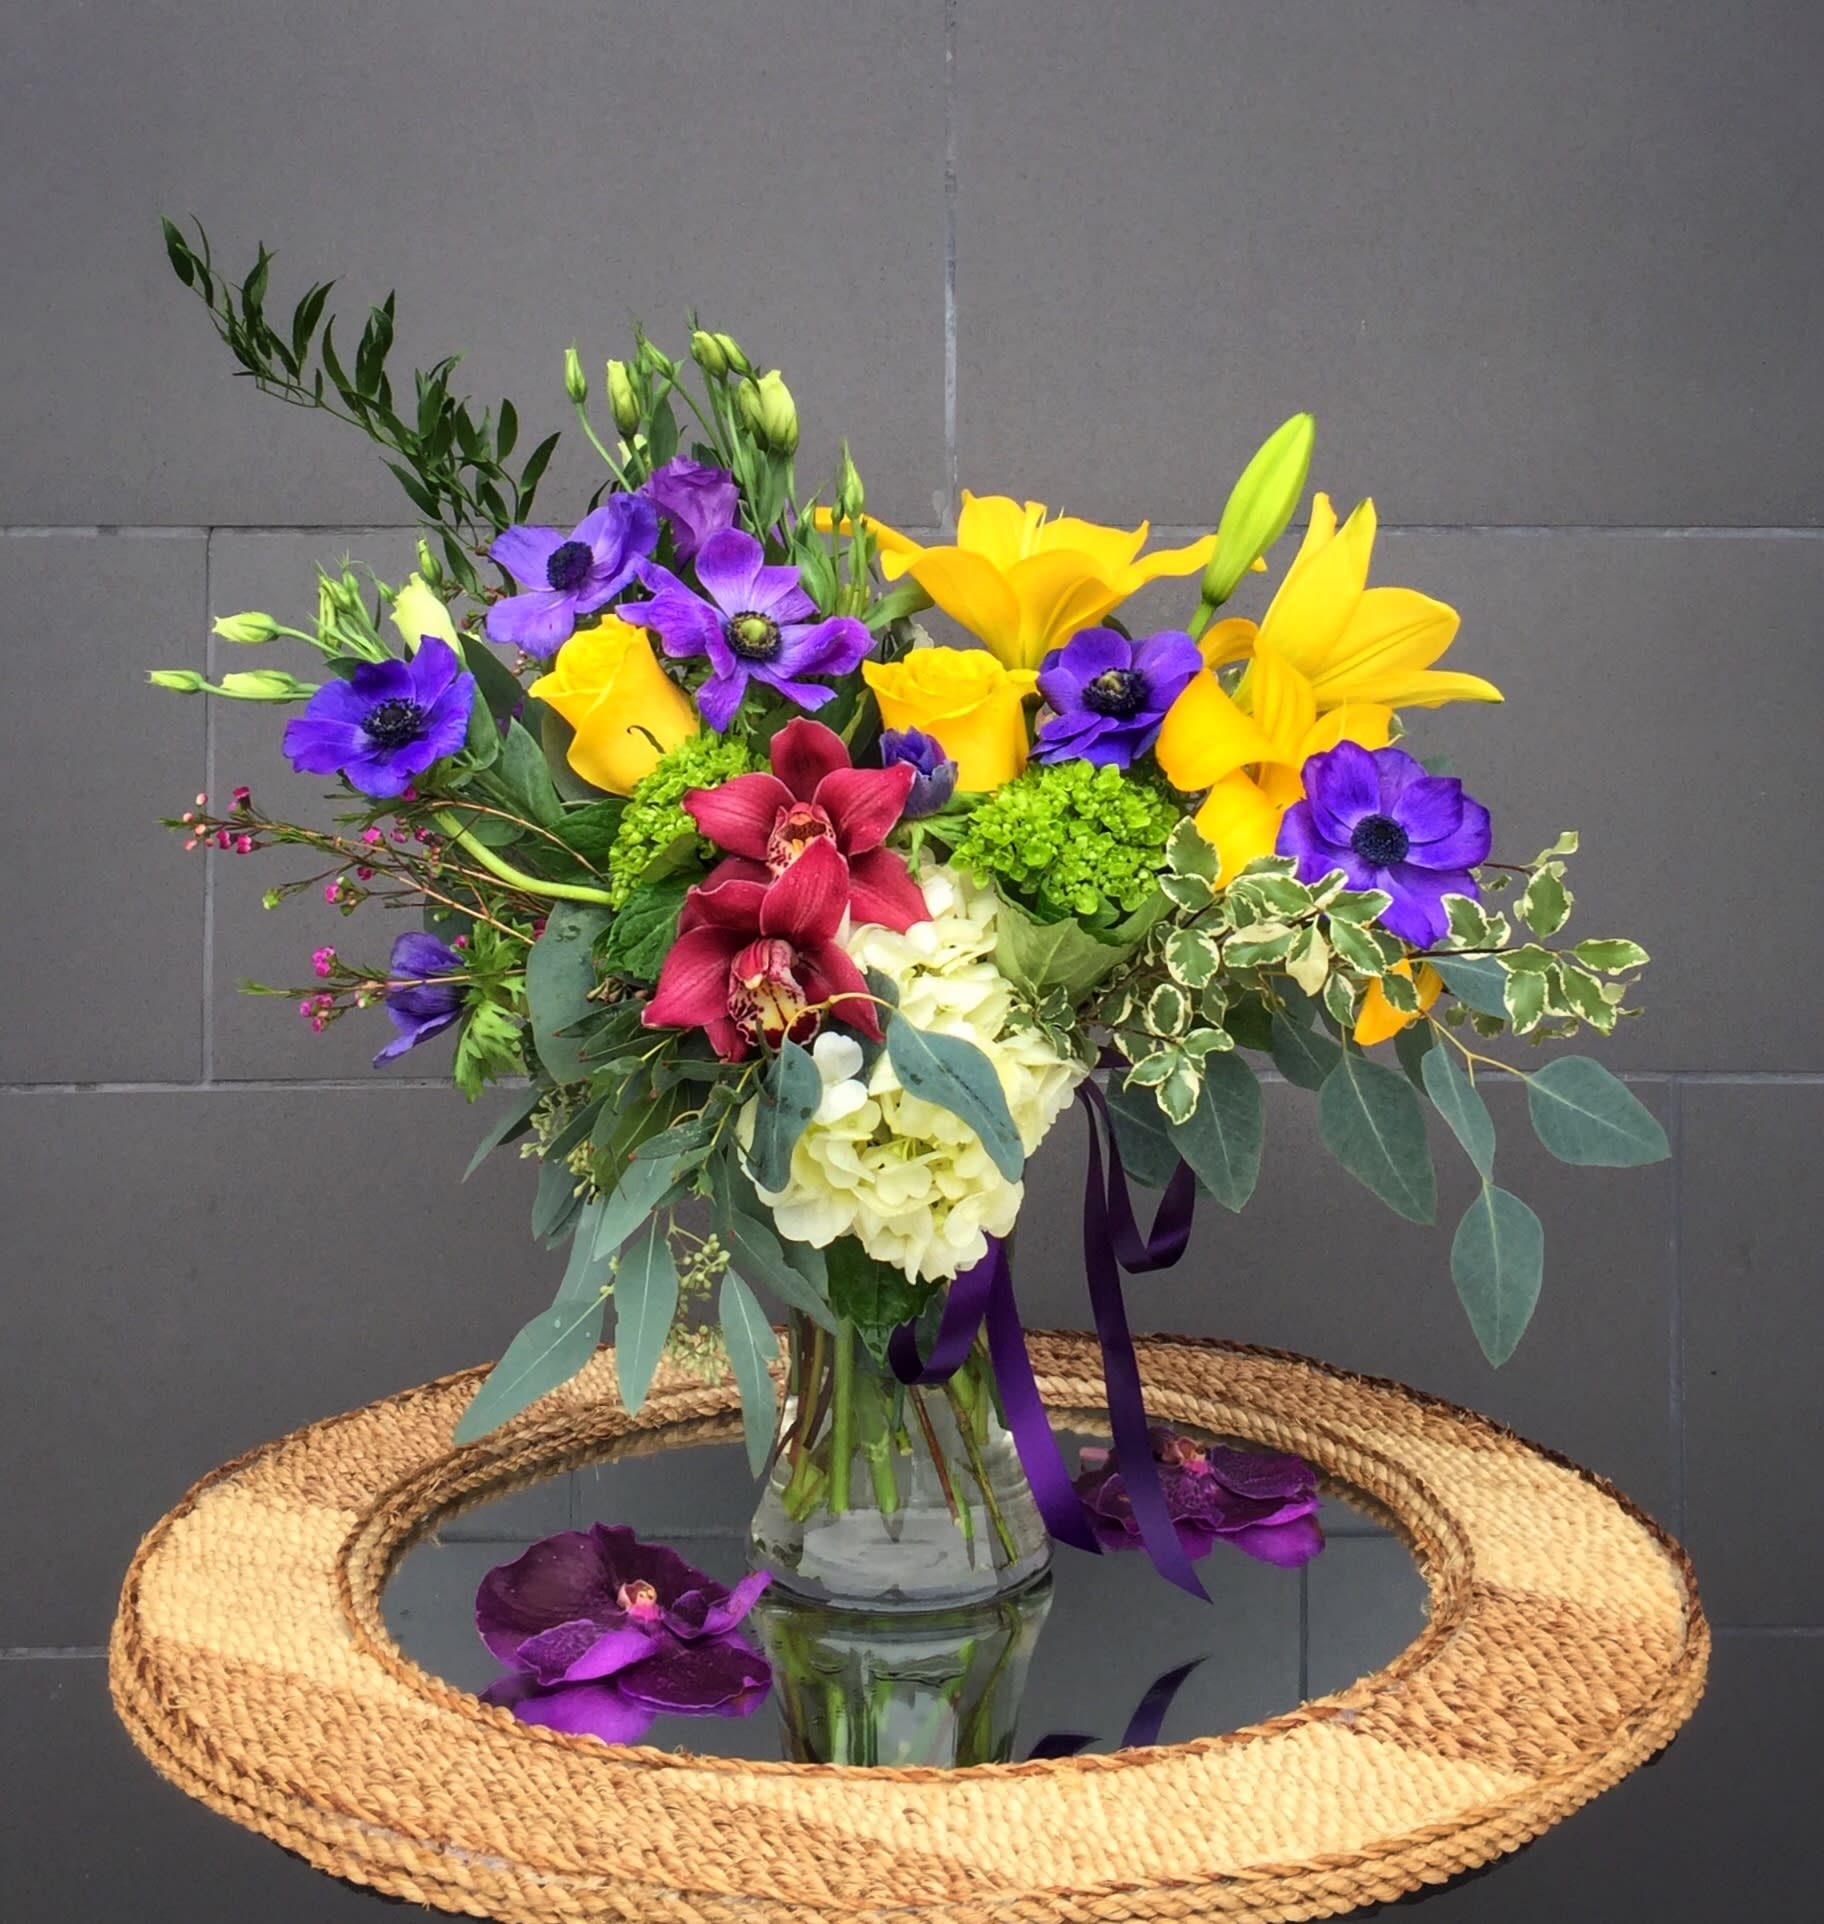 Vibrant Floral Medley - A colorful design including all premium flowers: lily, orchid, rose, lisianthus... and nice accents. STANDARD: FIRST PHOTO DELUXE: SECOND PHOTO